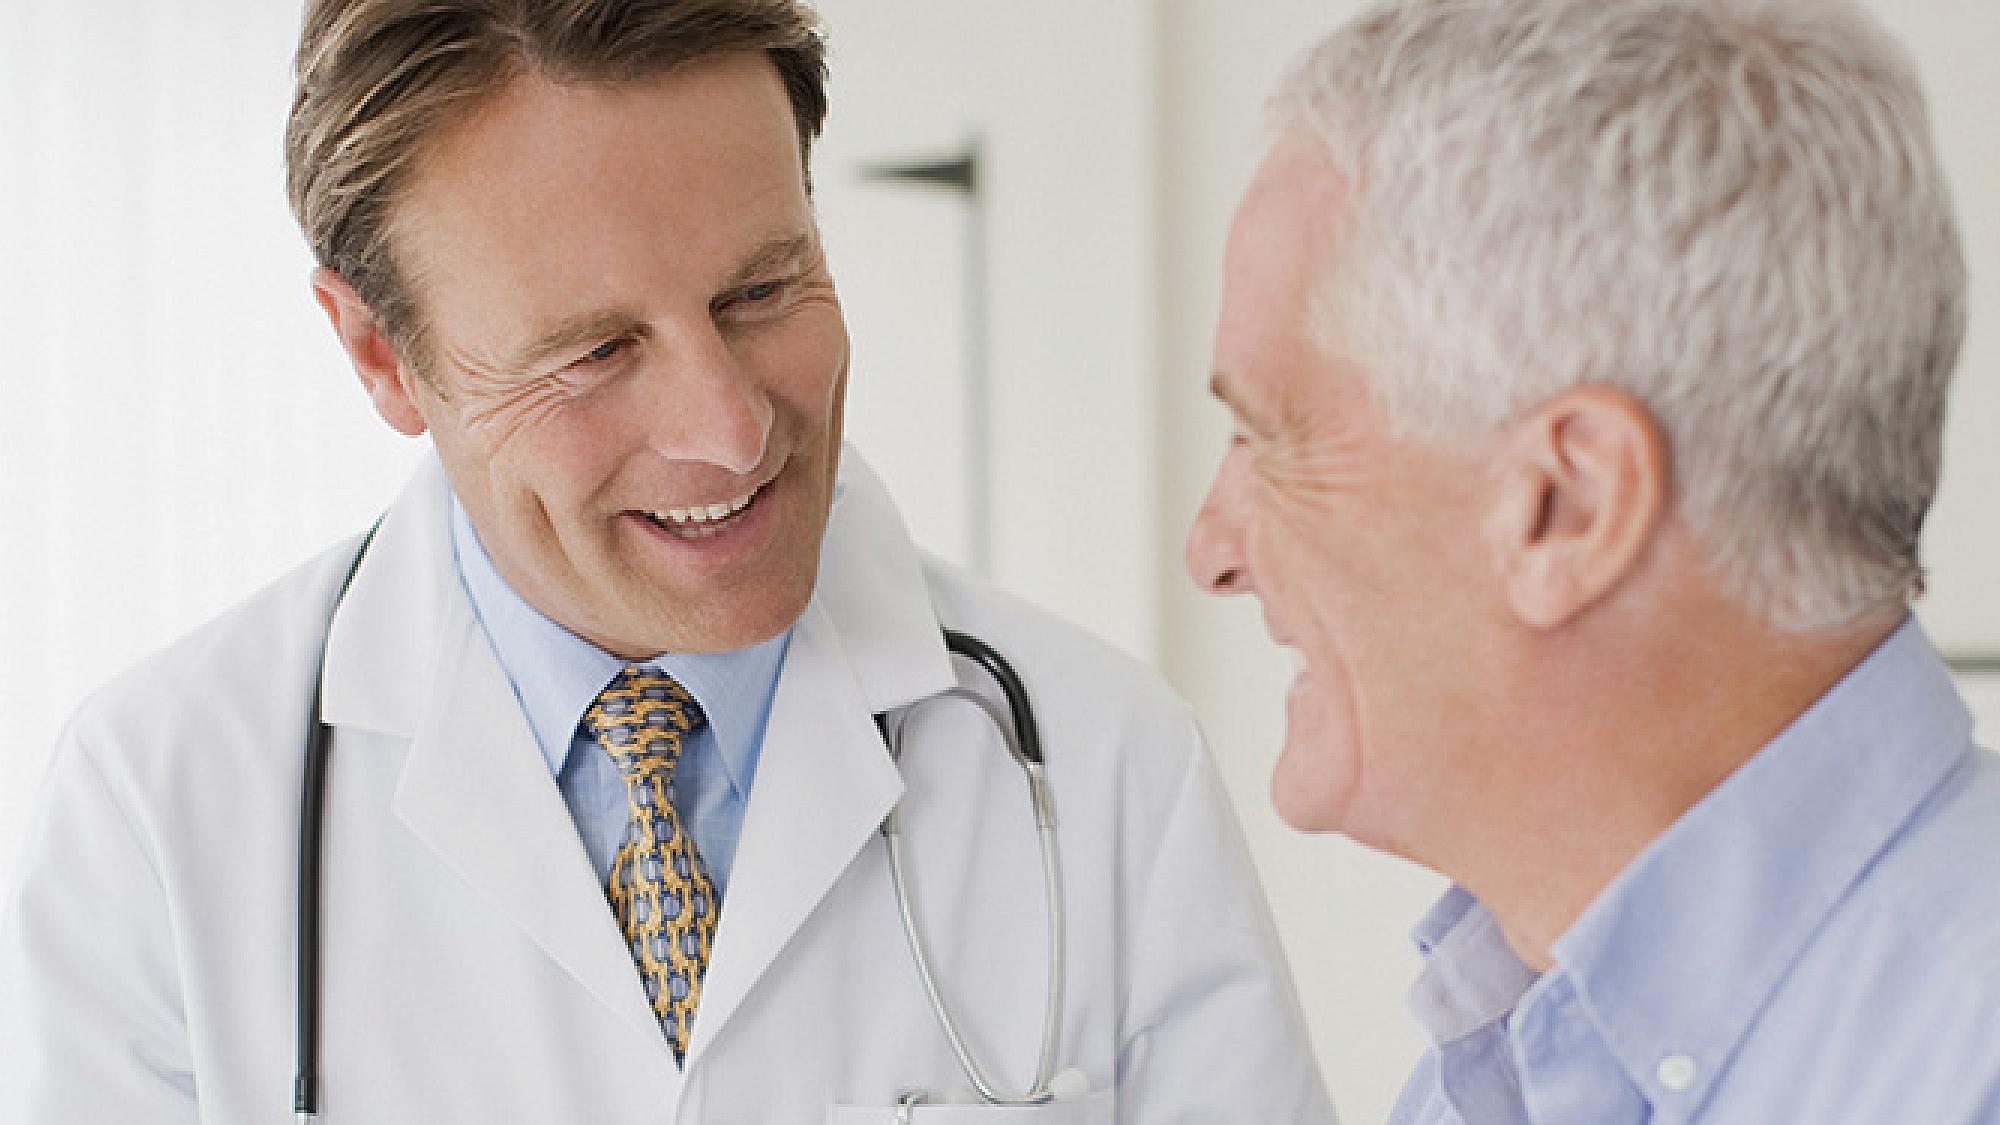 Male doctor speaking to male patient